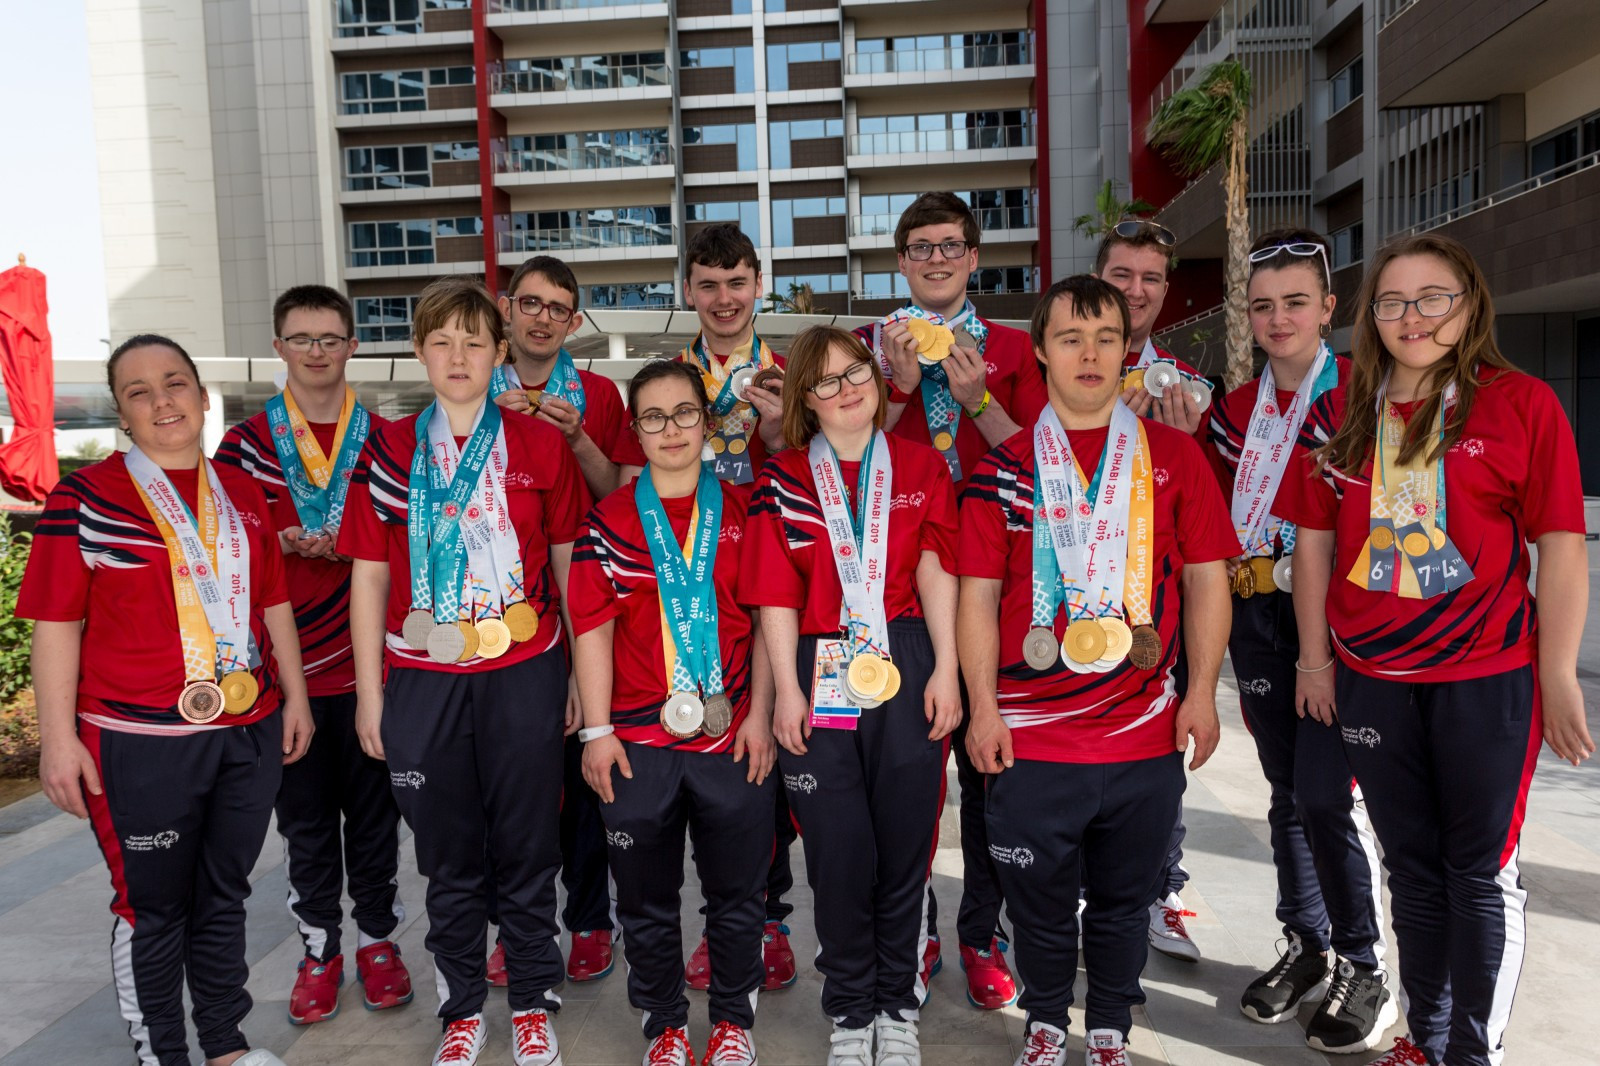 More than 2,000 athletes were expected to compete at the 2021 Special Olympic Great Britain National Summer Games ©Special Olympics GB